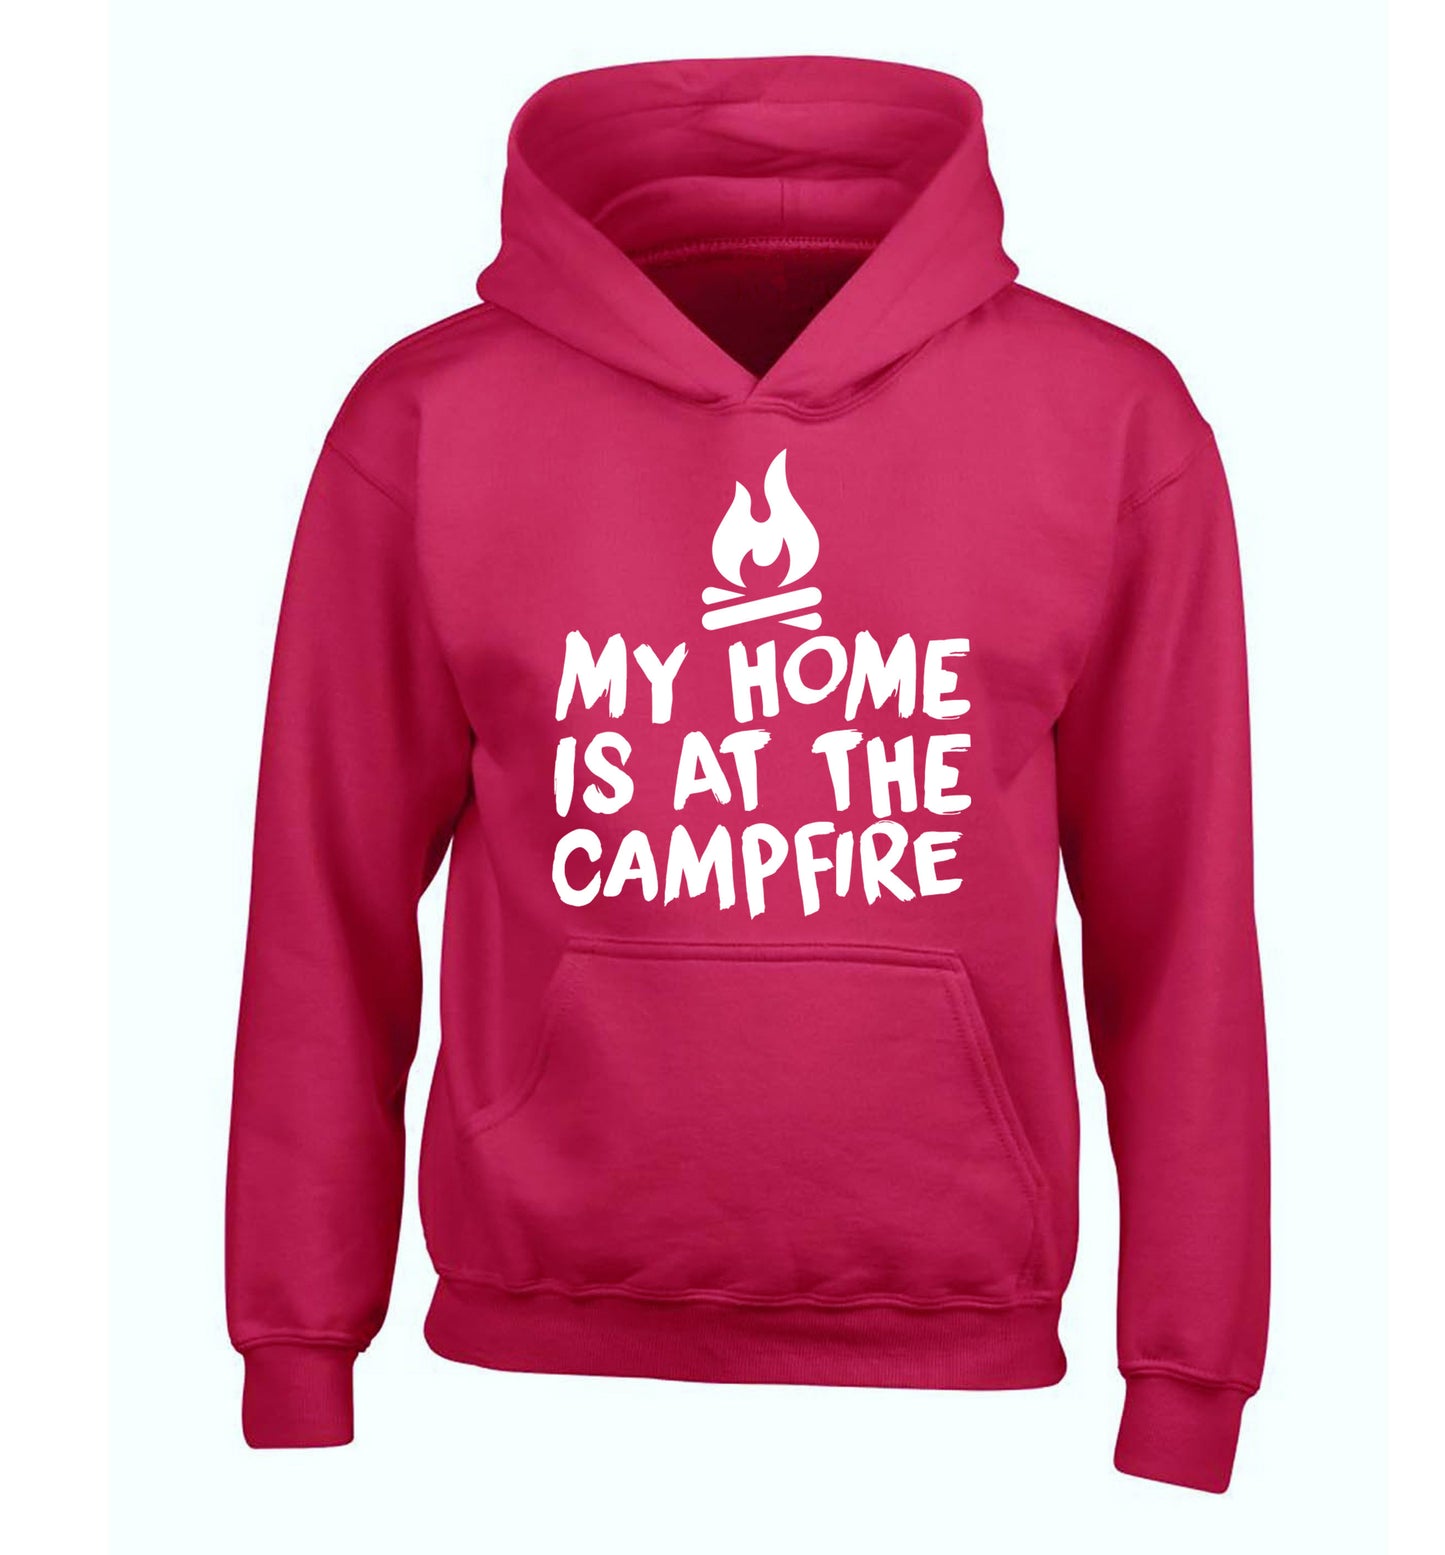 My home is at the campfire children's pink hoodie 12-14 Years